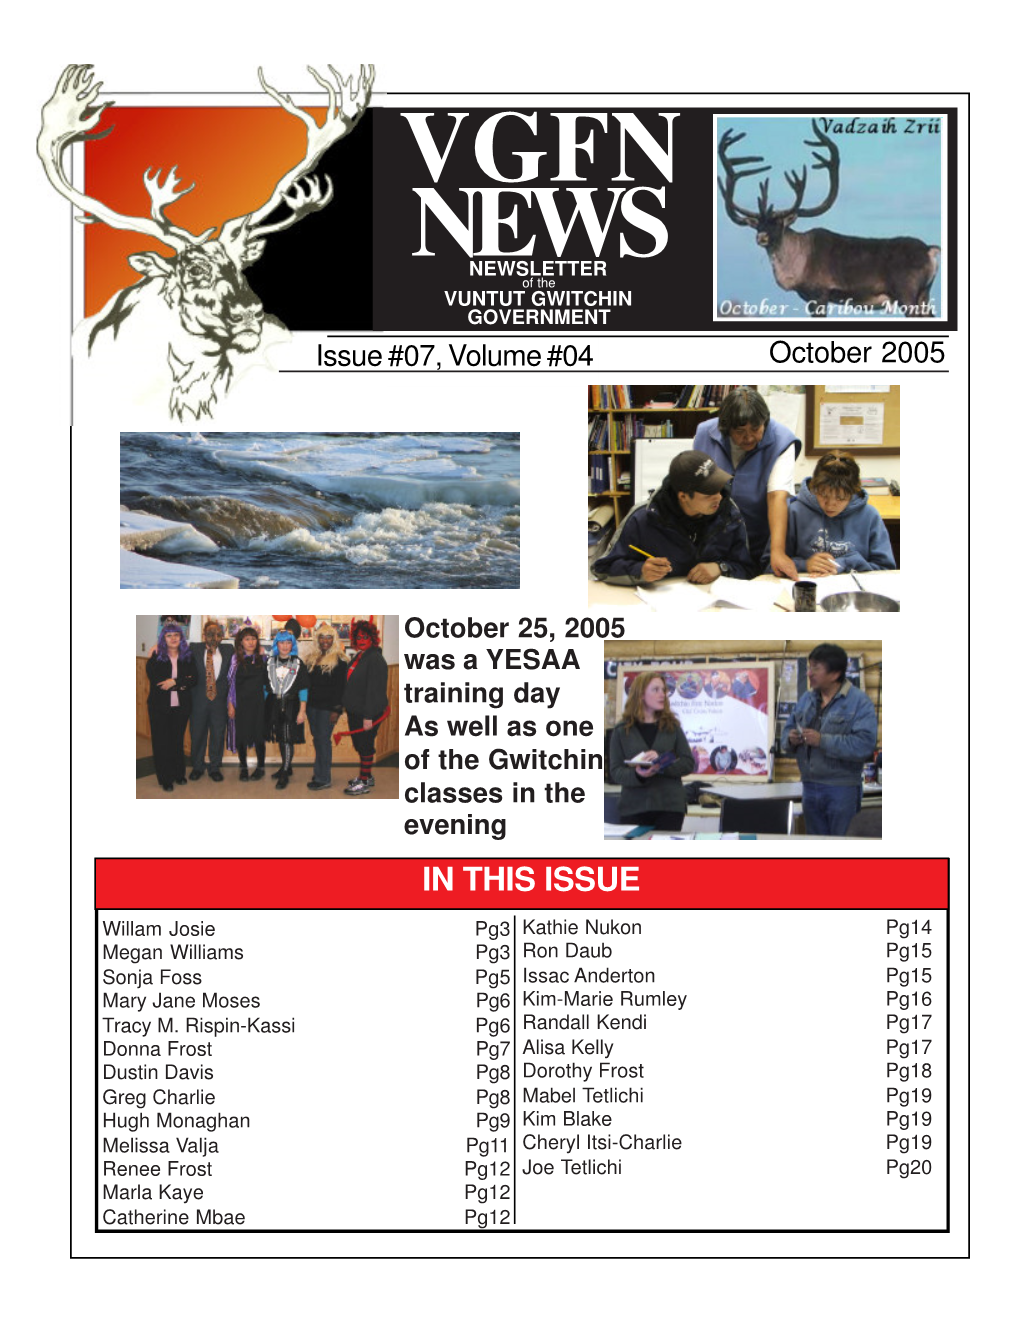 VGFN NEWS NEWSLETTER of the VUNTUT GWITCHIN GOVERNMENT Issue #07, Volume #04 October 2005